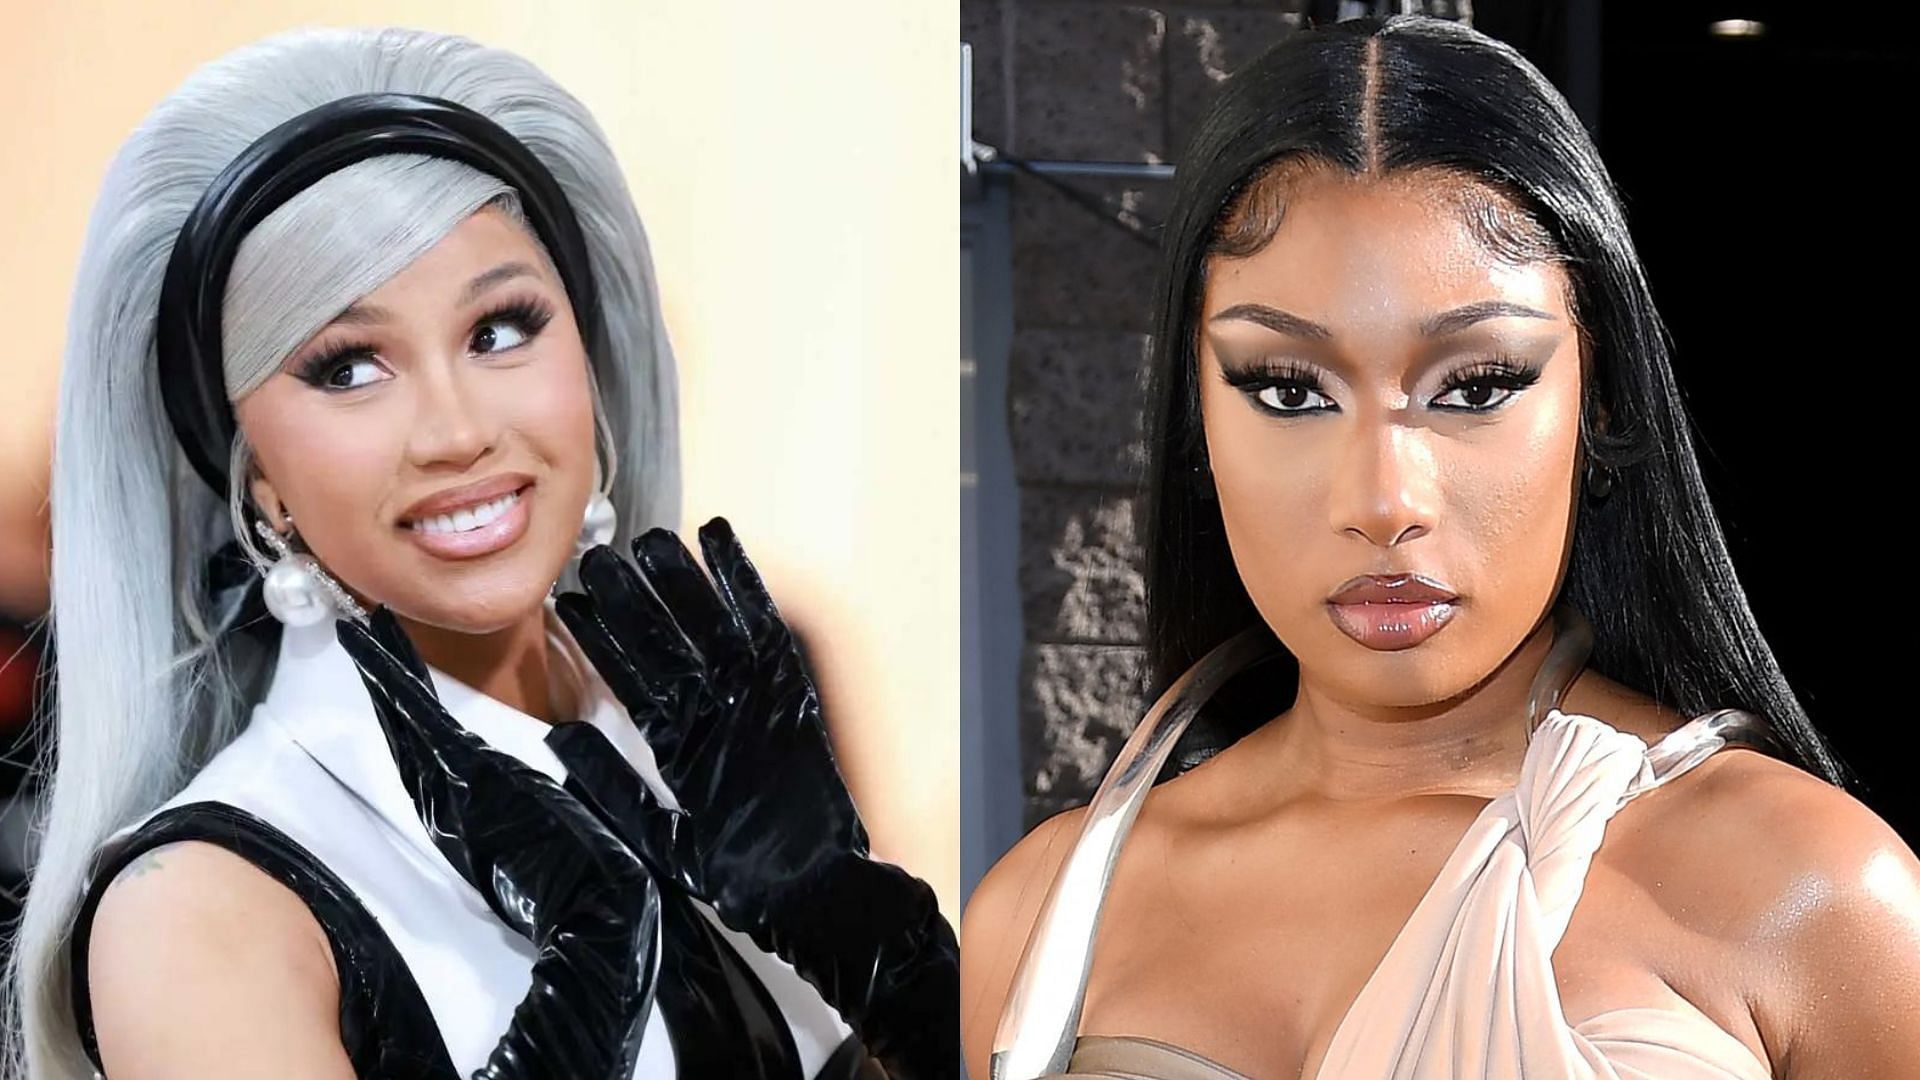 Cardi B and Megan Thee Stallion have been challenged by WWE Superstars.